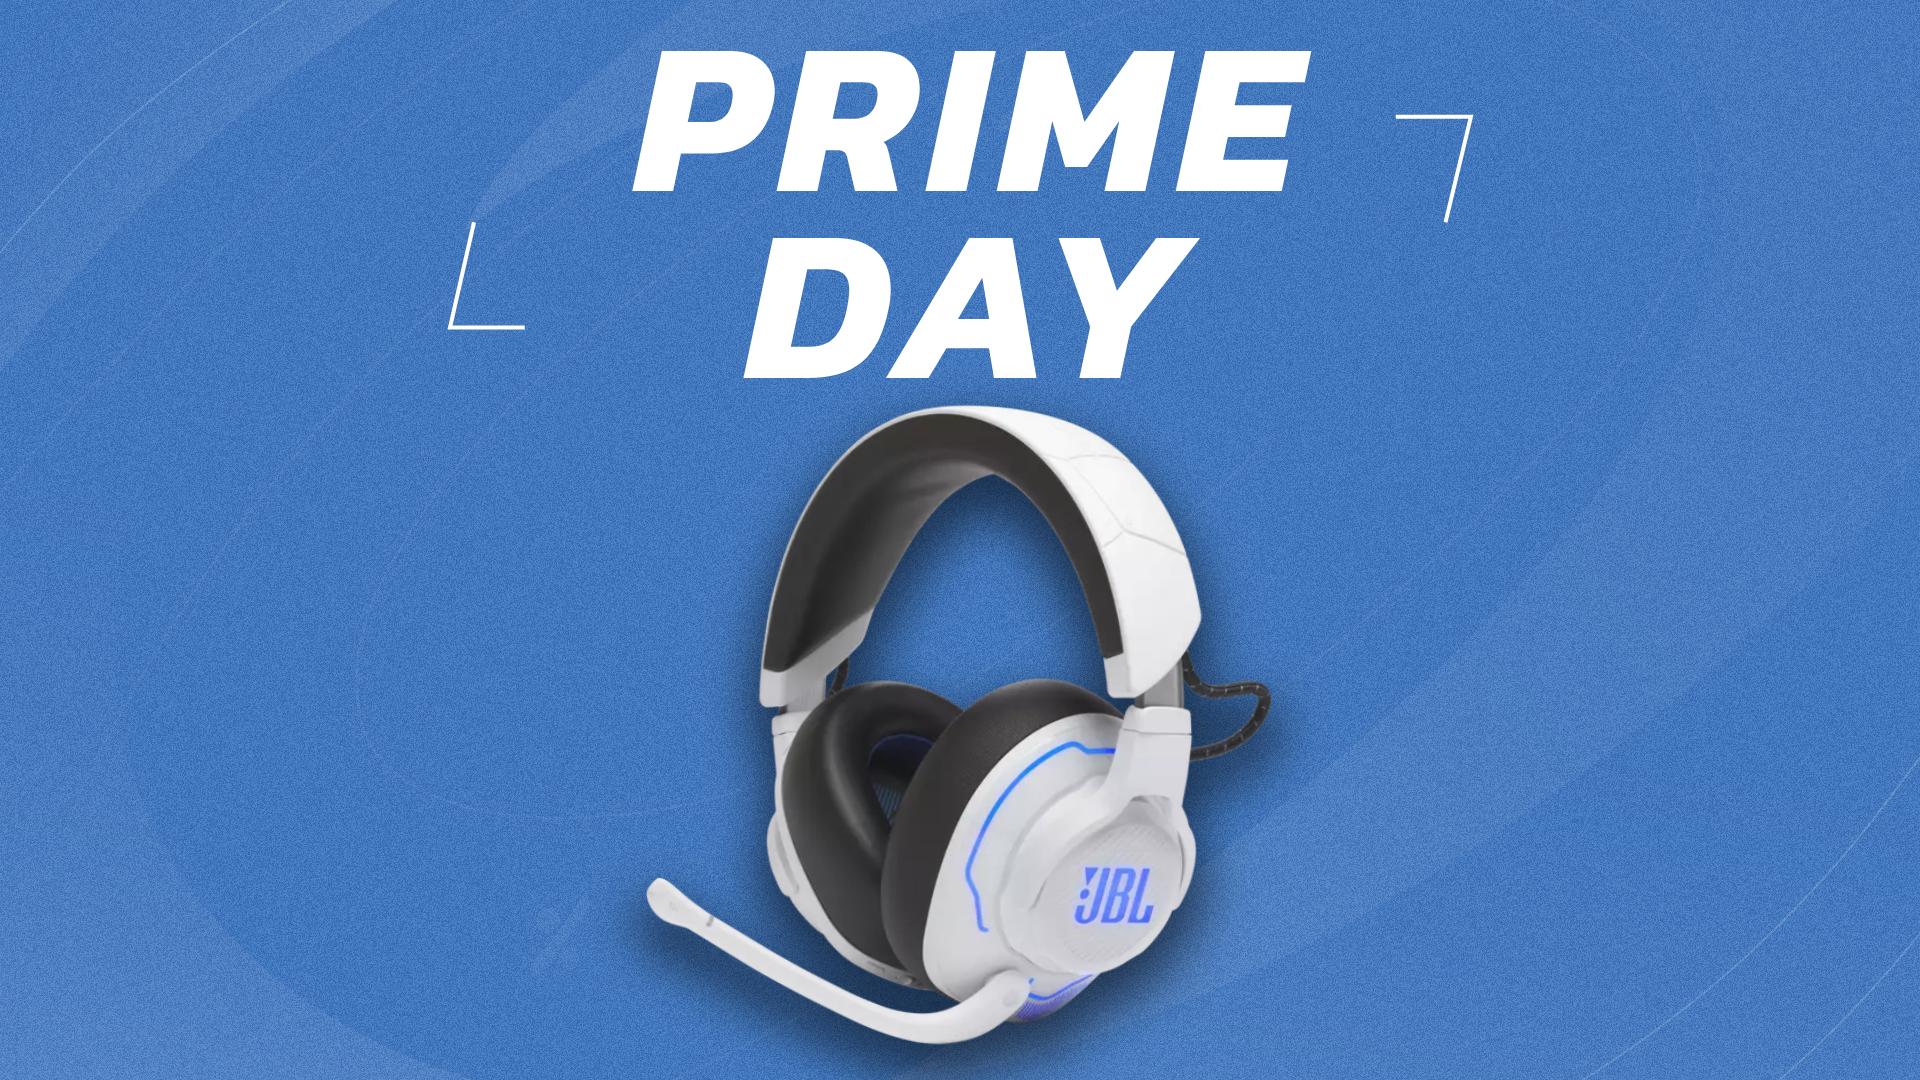 JBL PS5 gaming headset prime day deal on a blue background